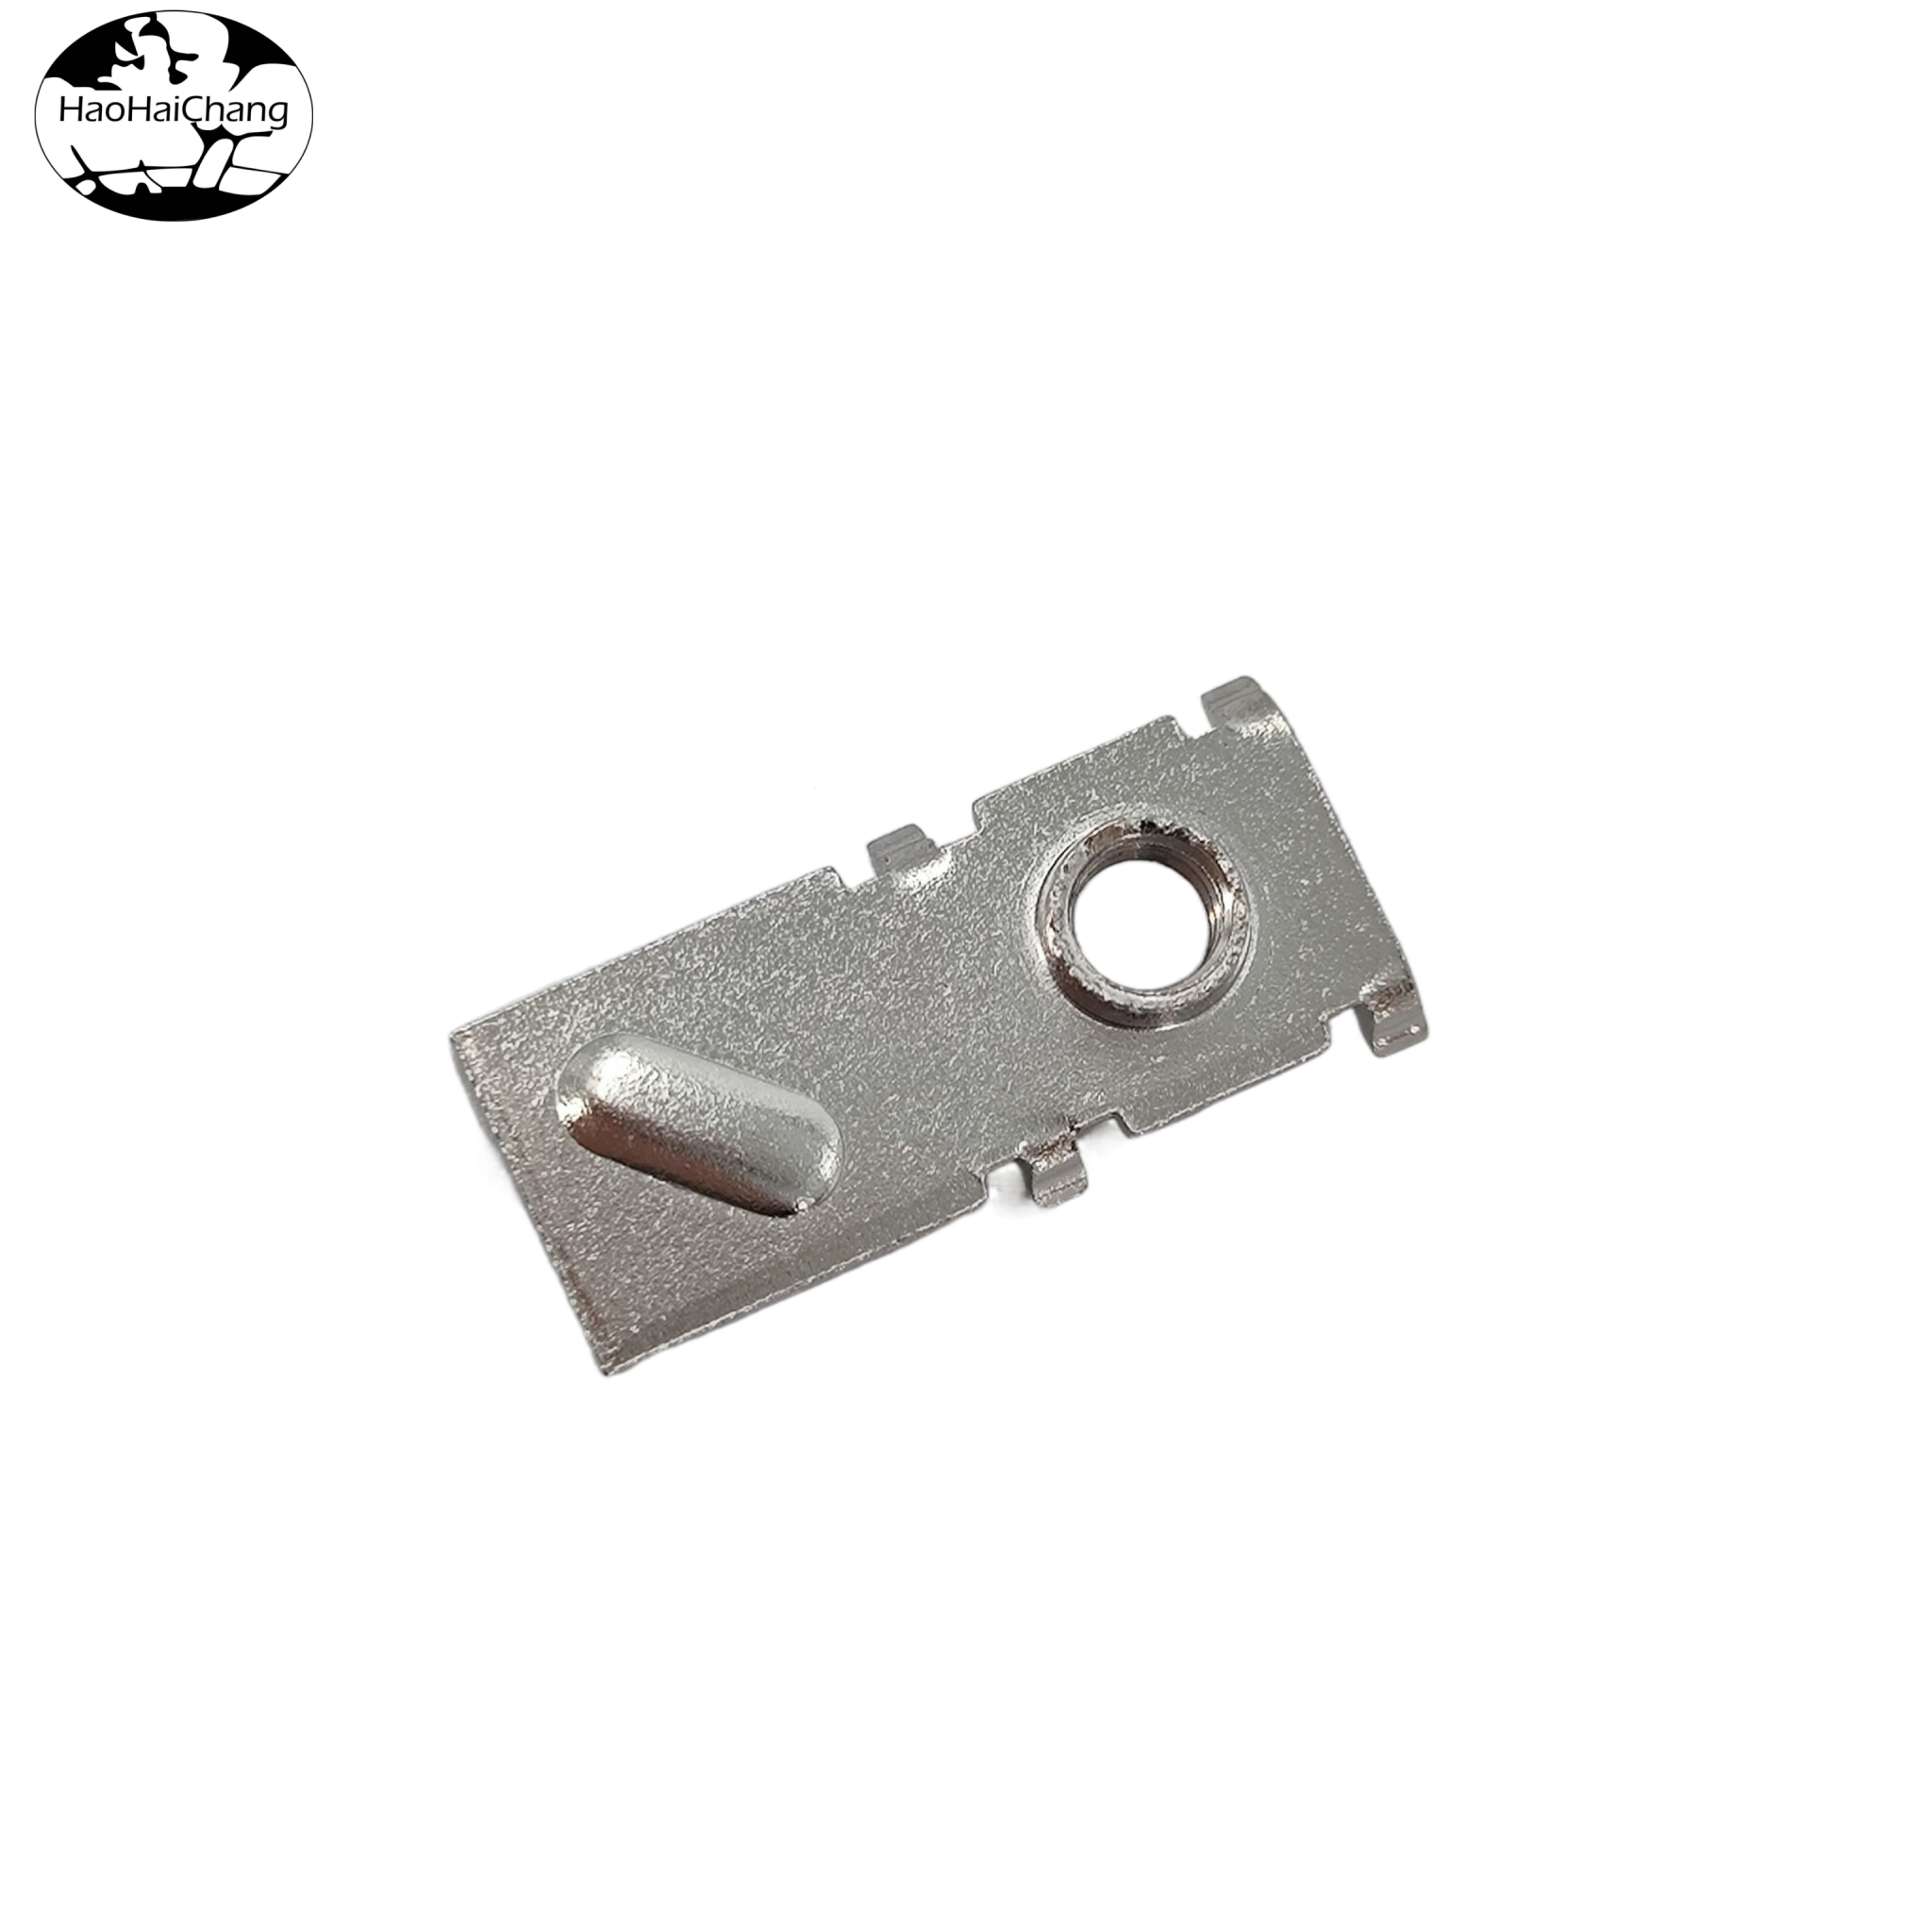 HHC-0234 Connector